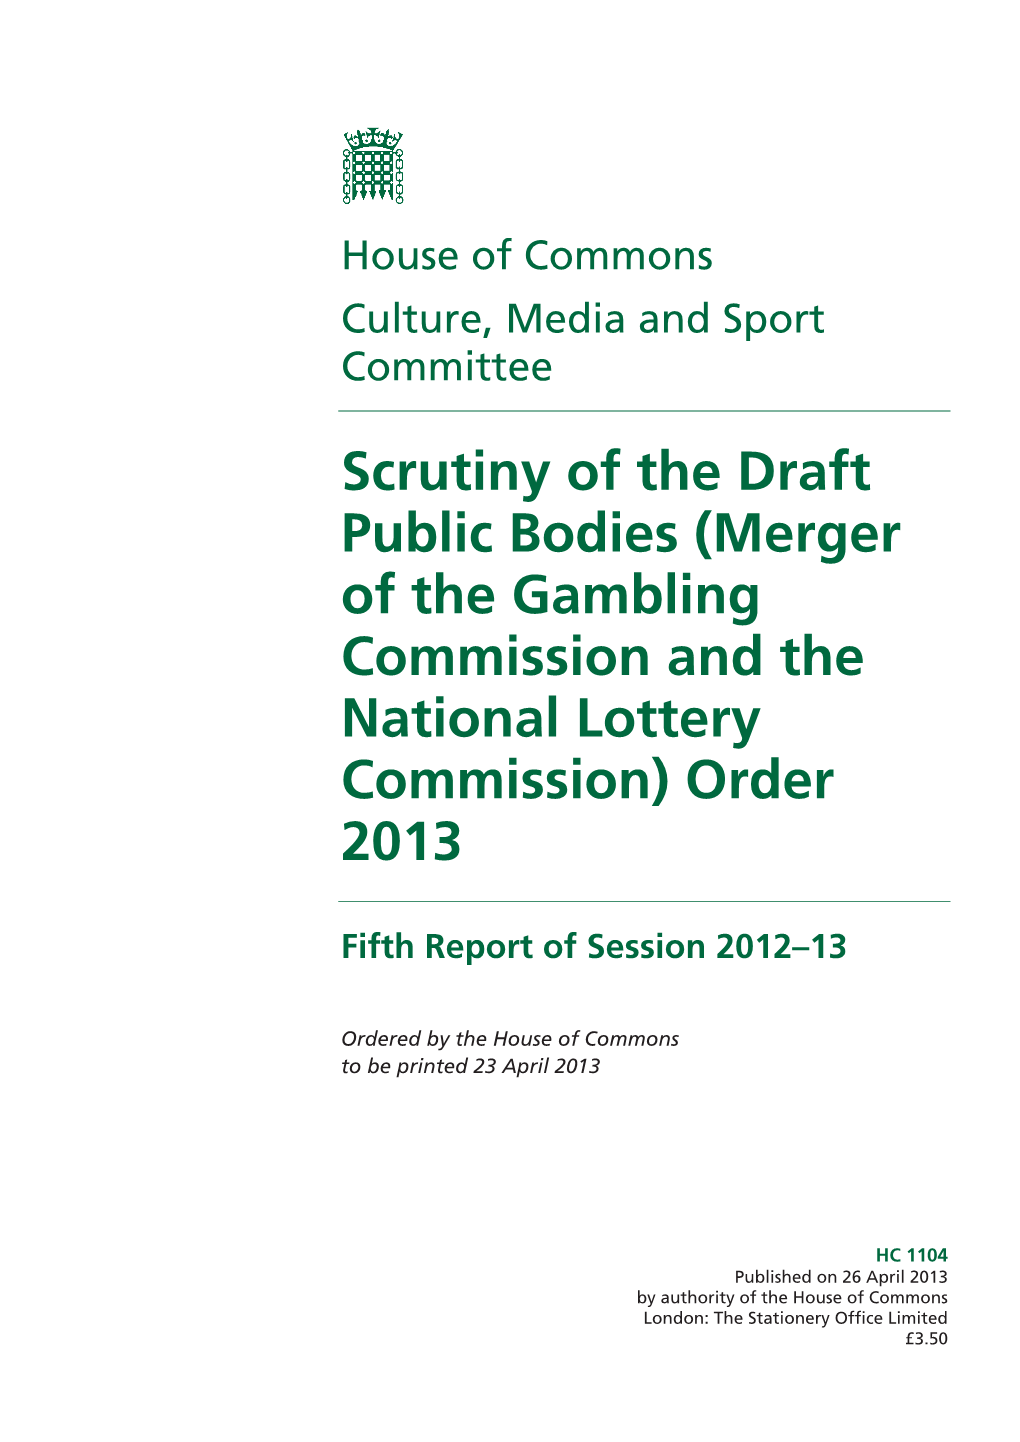 Scrutiny of the Draft Public Bodies (Merger of the Gambling Commission and the National Lottery Commission) Order 2013